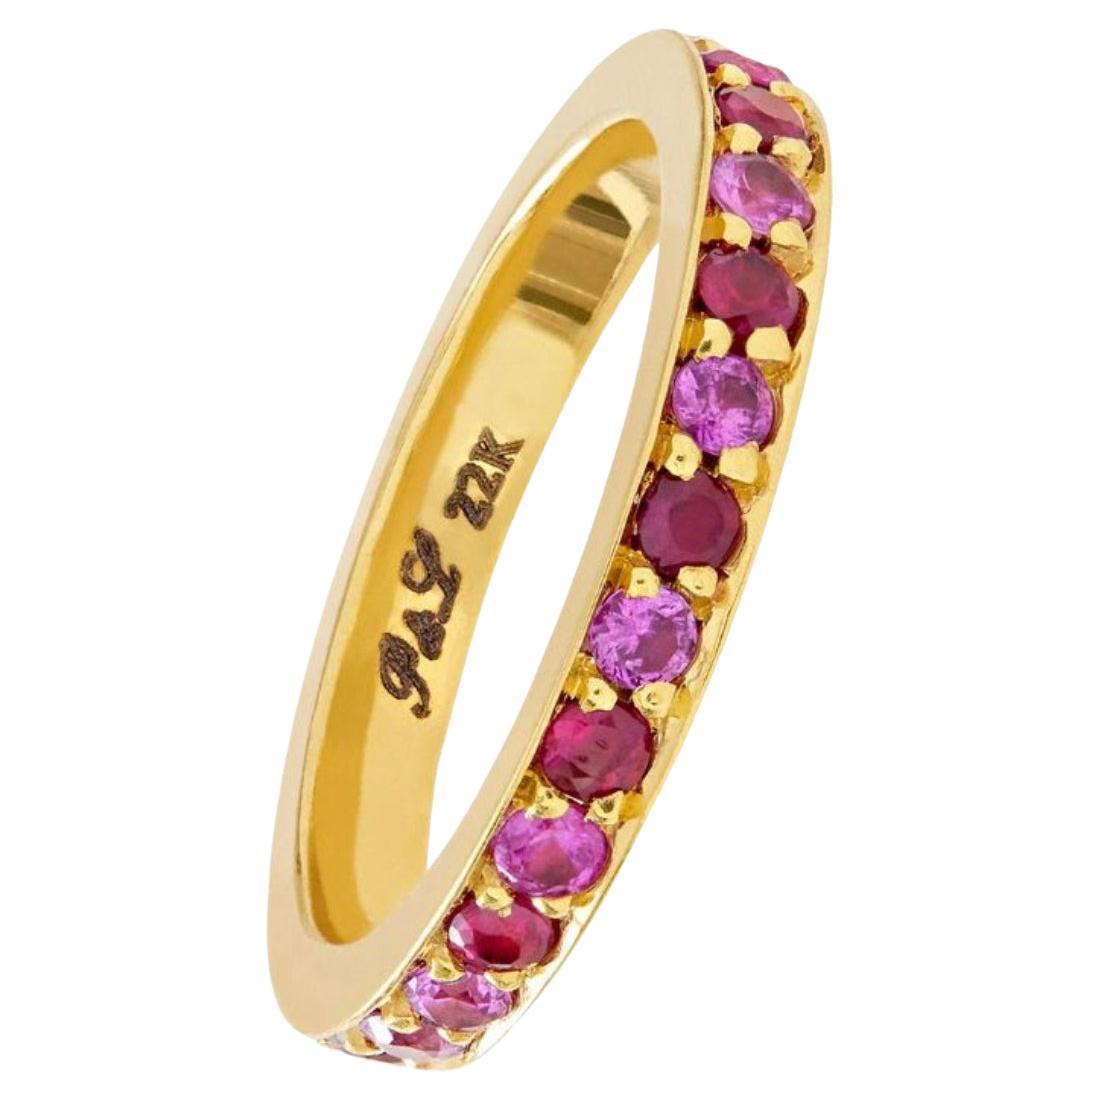 Paris & Lily, One-Of-A-Kind, Handmade, 22K Gold, Ruby and Pink Sapphire Band For Sale